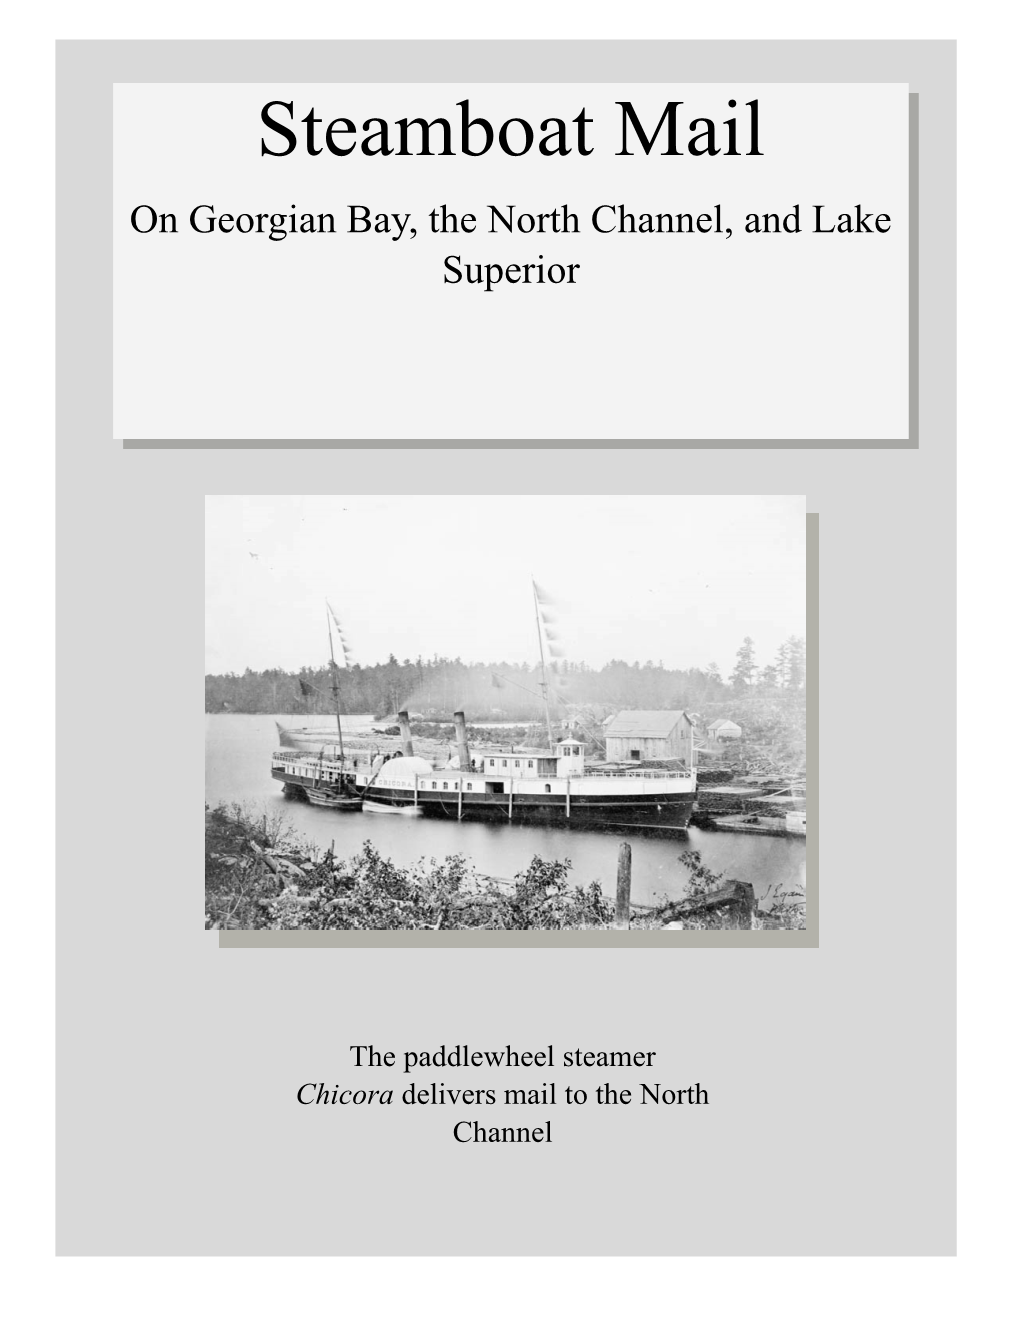 Steamboat Mail on Georgian Bay, the North Channel, and Lake Superior